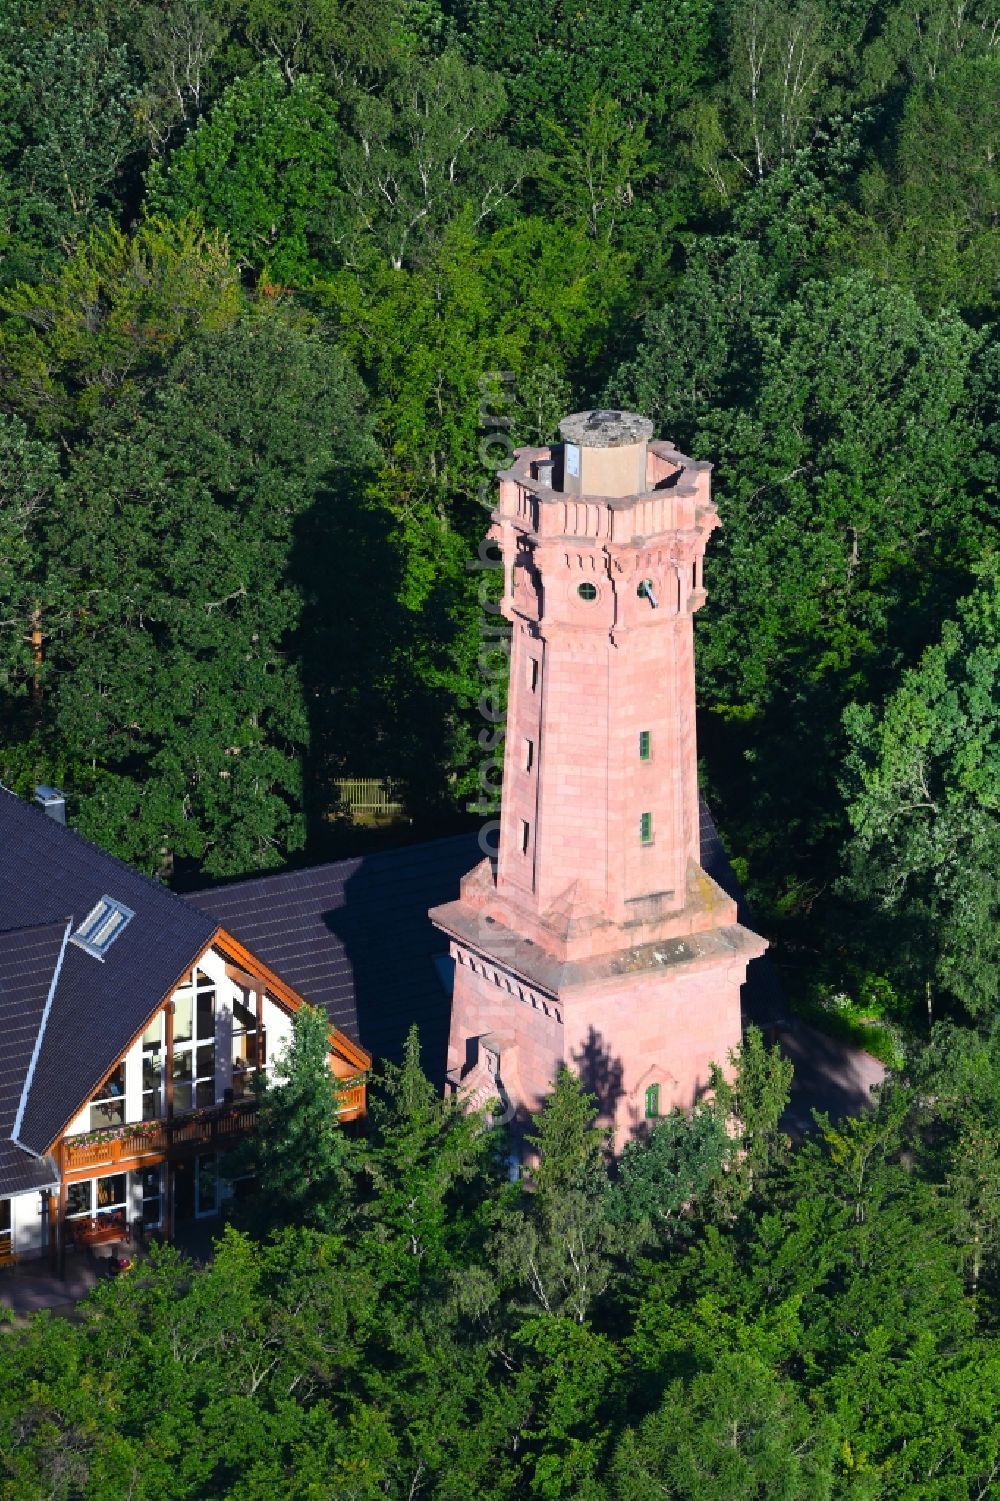 Aerial image Nosswitz - Structure of the observation tower Tuermerhaus on Rochlitzer Berg in Nosswitz in the state Saxony, Germany